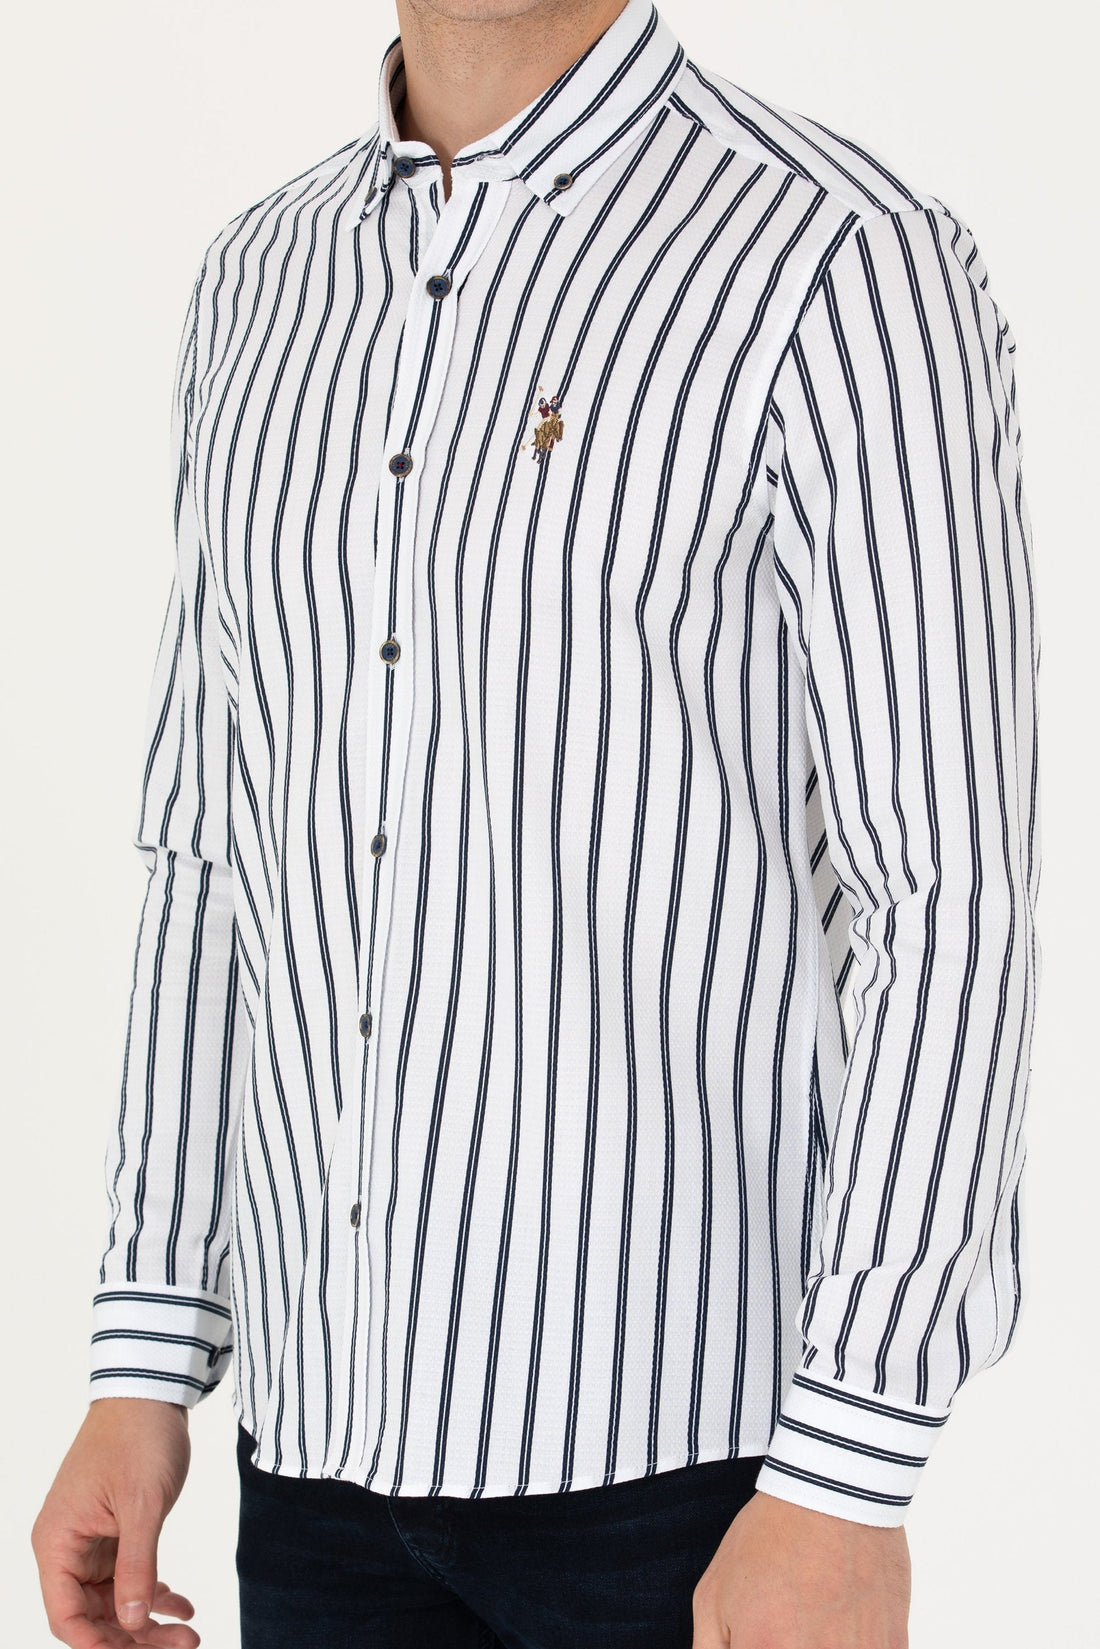 White Shirt With Navy Stripes And Logo_G081SZ0040 1763446_VR033_02